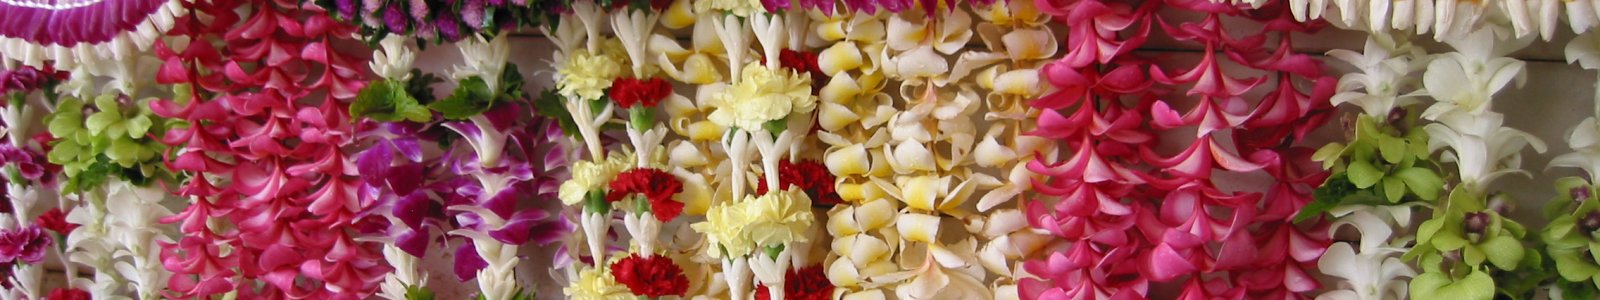 All About Leis - Exploring the Art and Significance of the Hawaiian Flower Garland